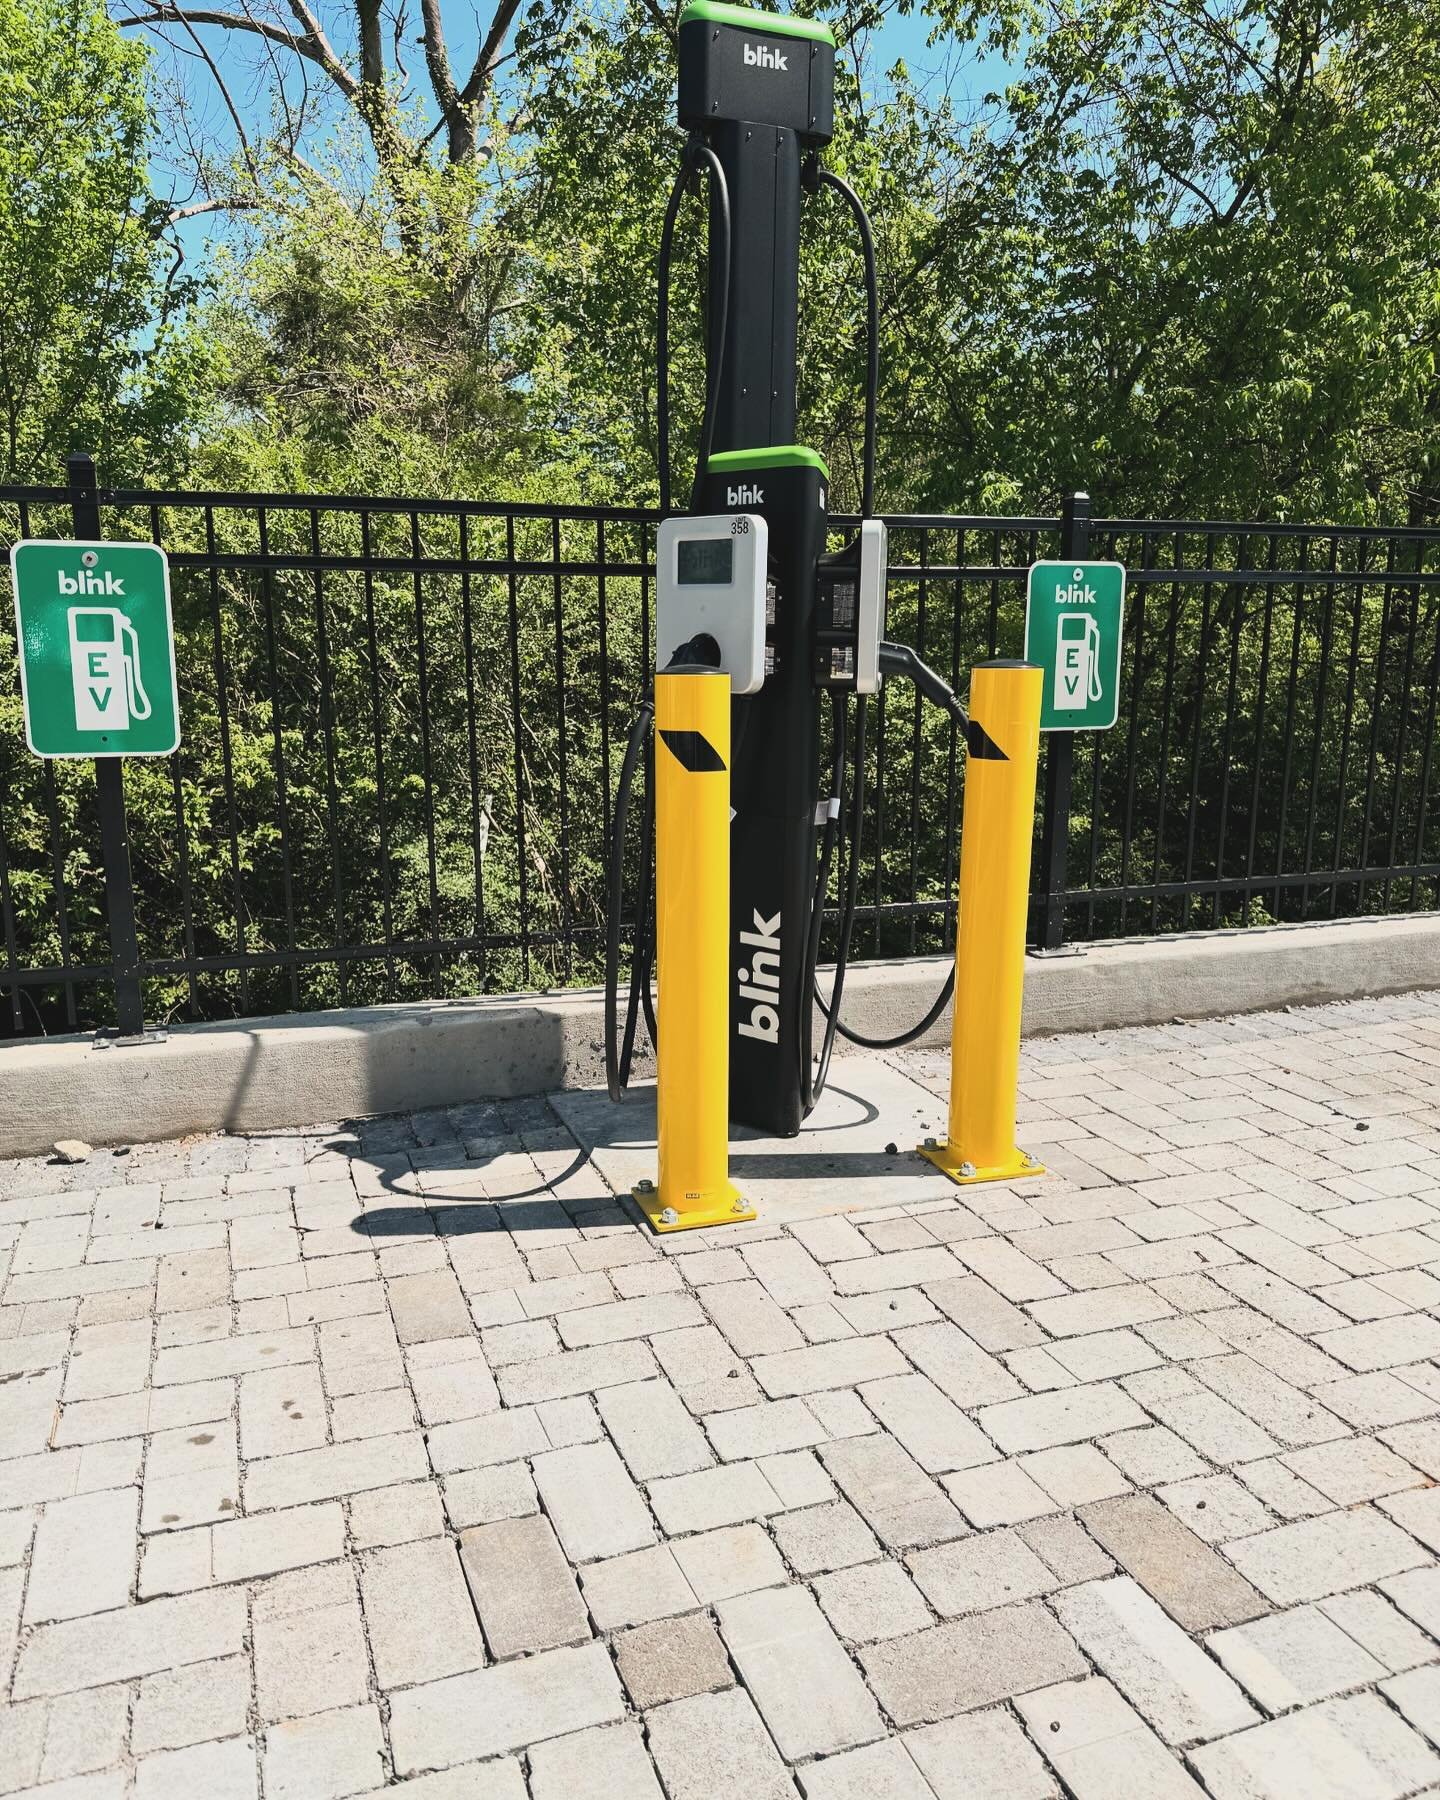 Need a charge? We just added 2 BRAND NEW EV charging stations! 

Swing by today to schedule a tour!